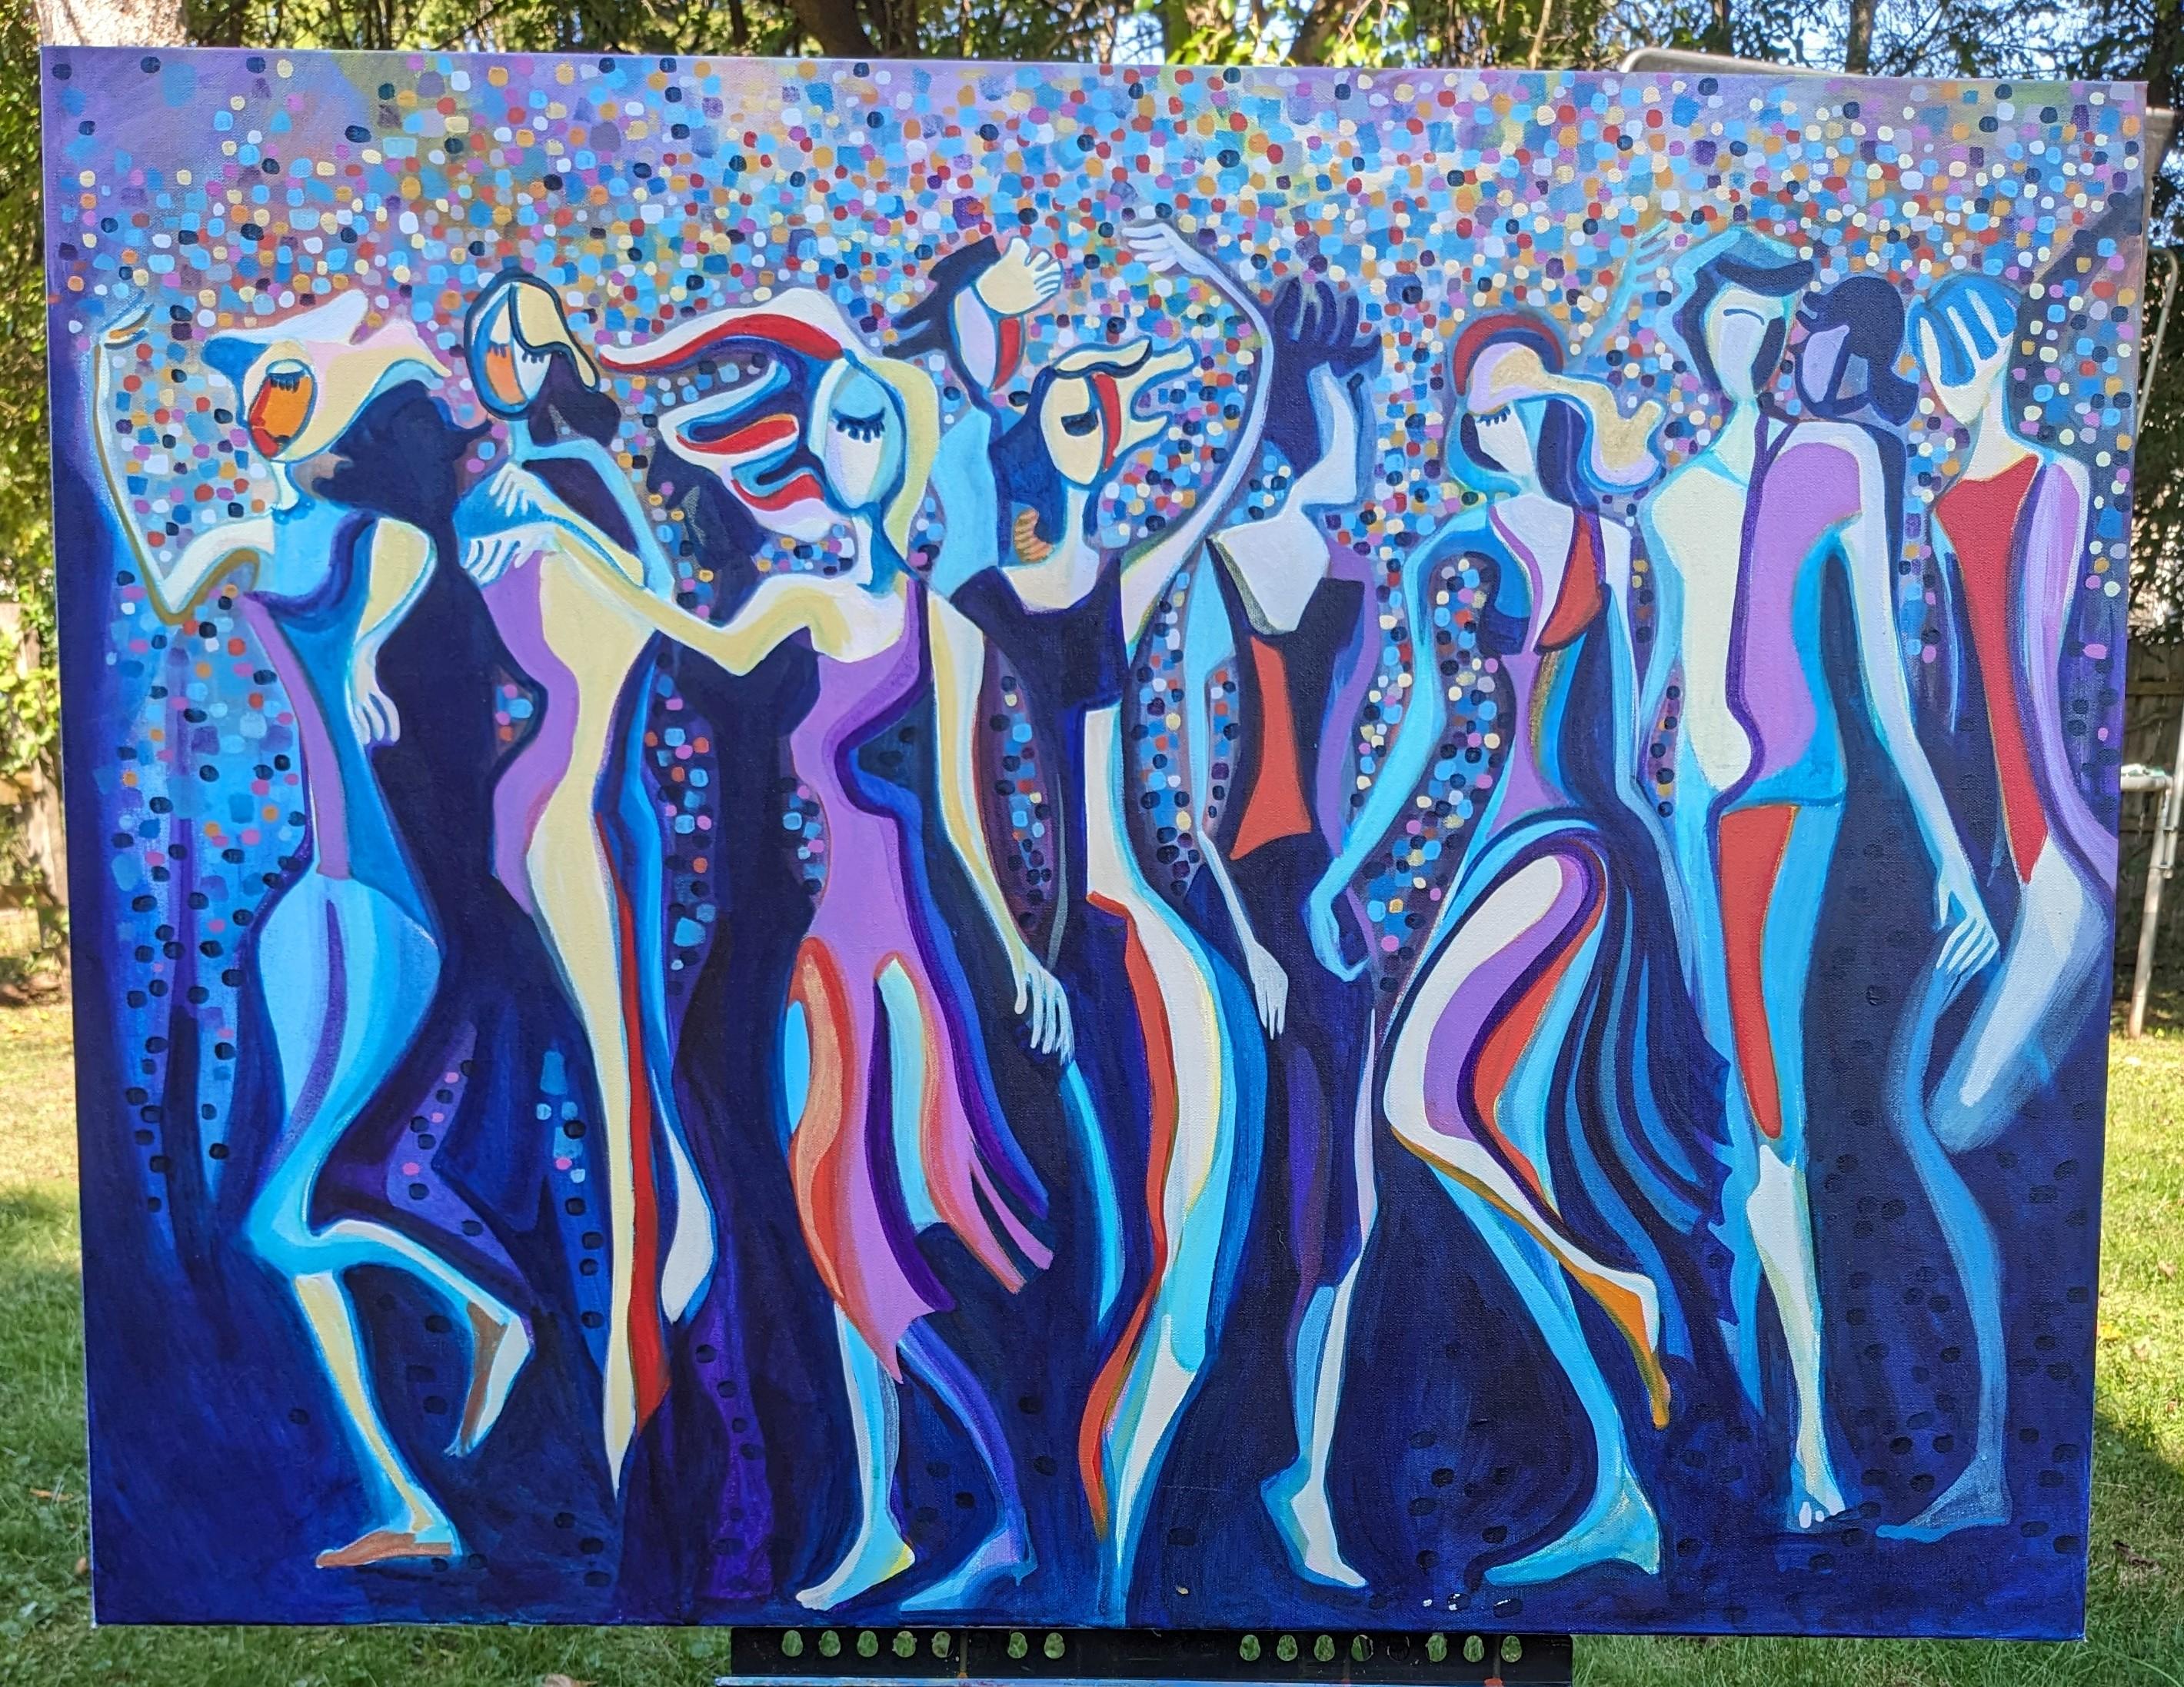 <p>Artist Comments<br>The painting captures a lively scene where a group of people dances joyfully, lost in the music with closed eyes. Their vibrant clothing and fluid movements infuse the composition with energy. The dotted lights add an extra